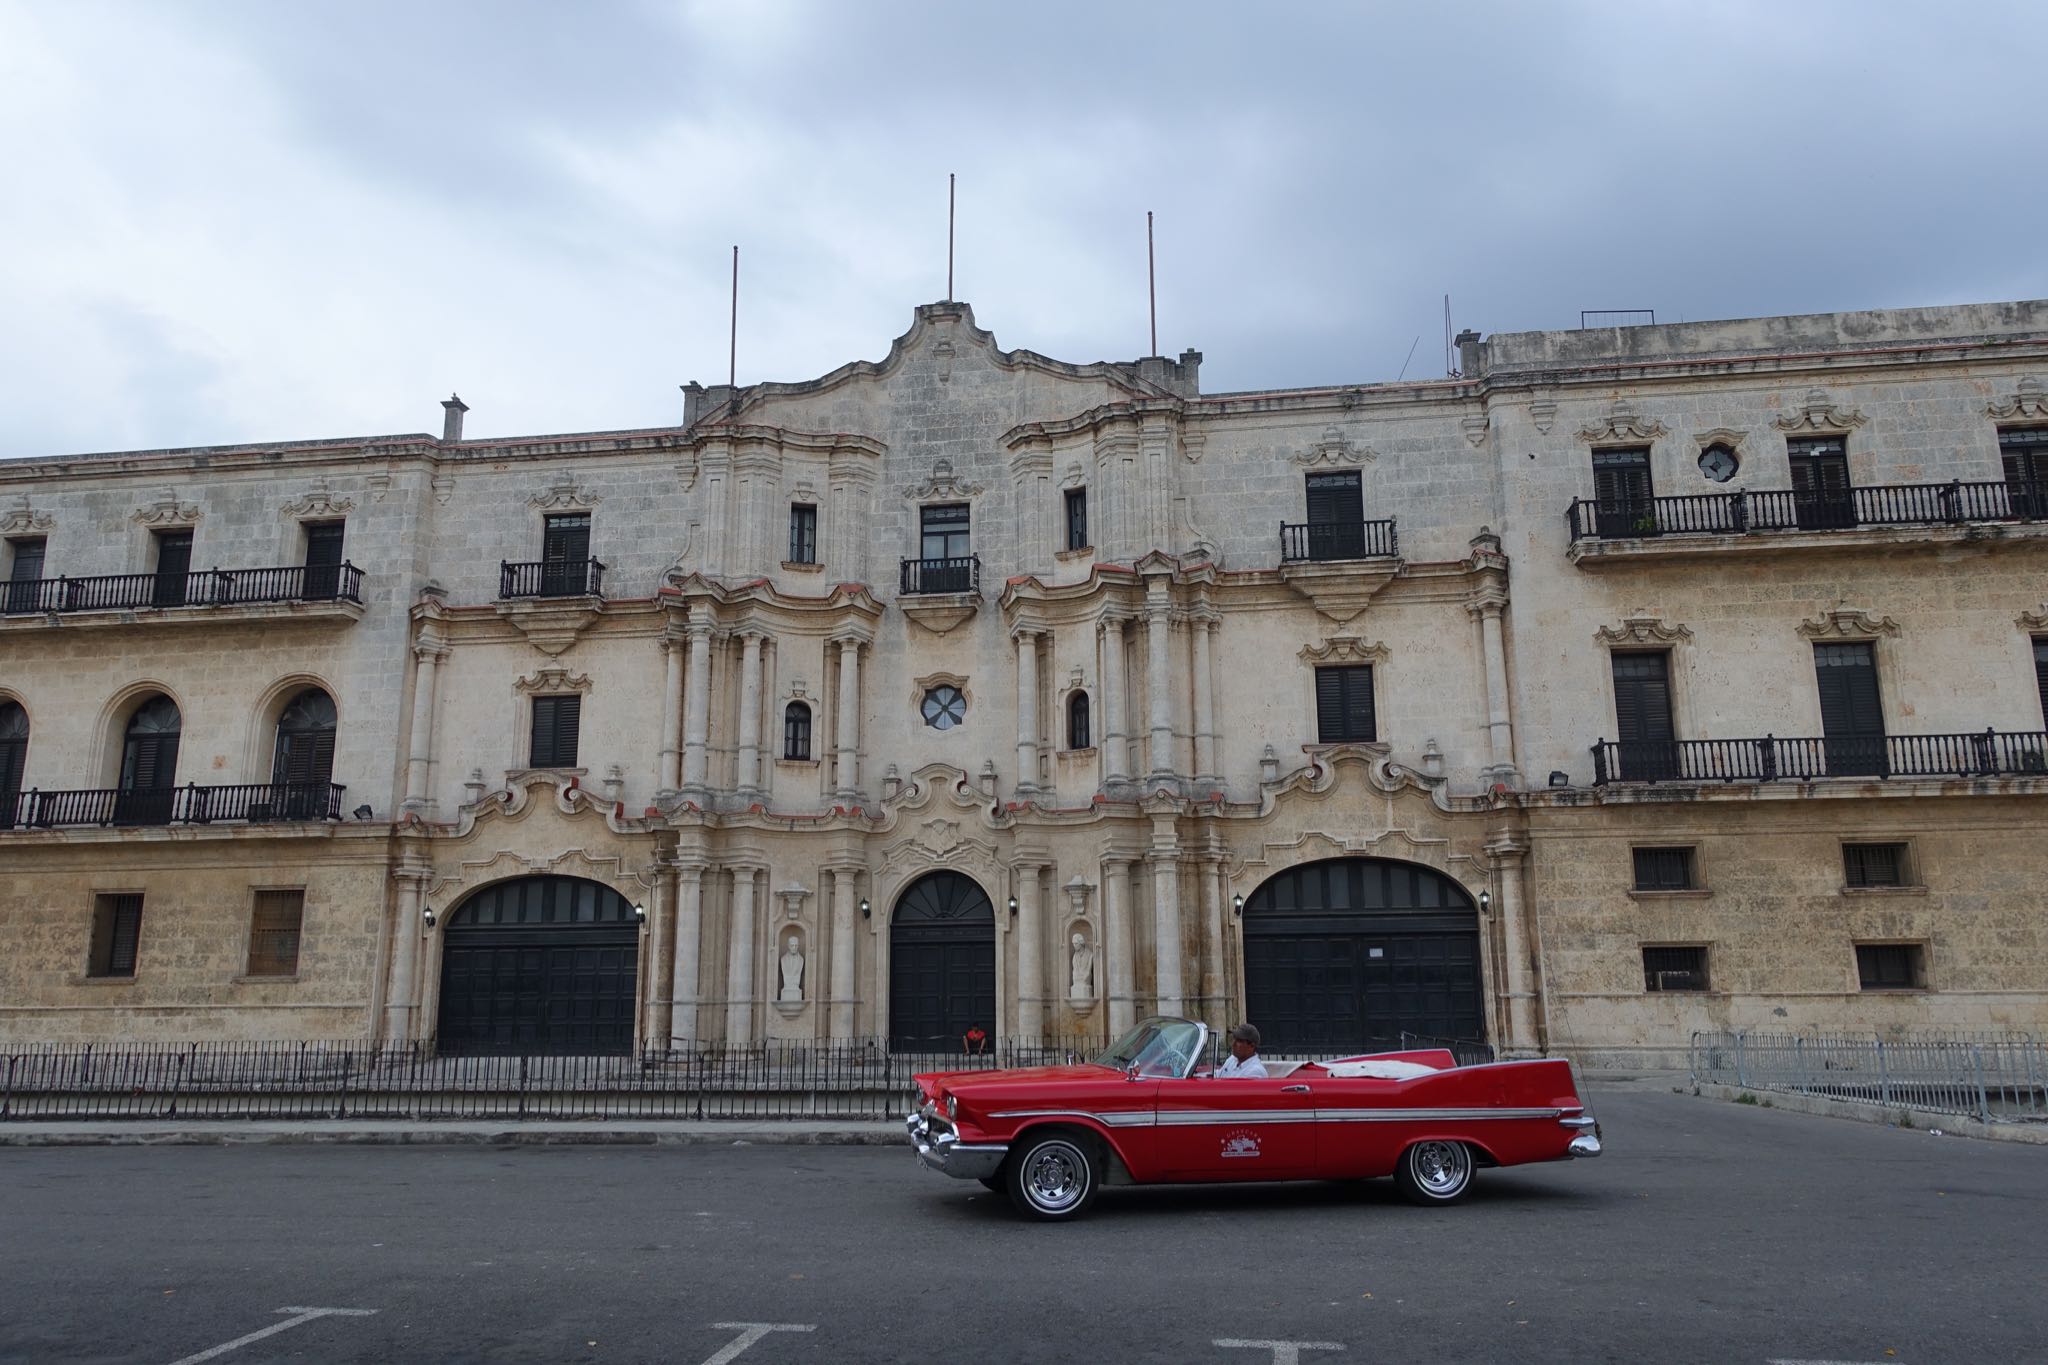 Photo 93 of 221 from the album Highlights Cuba 2019.